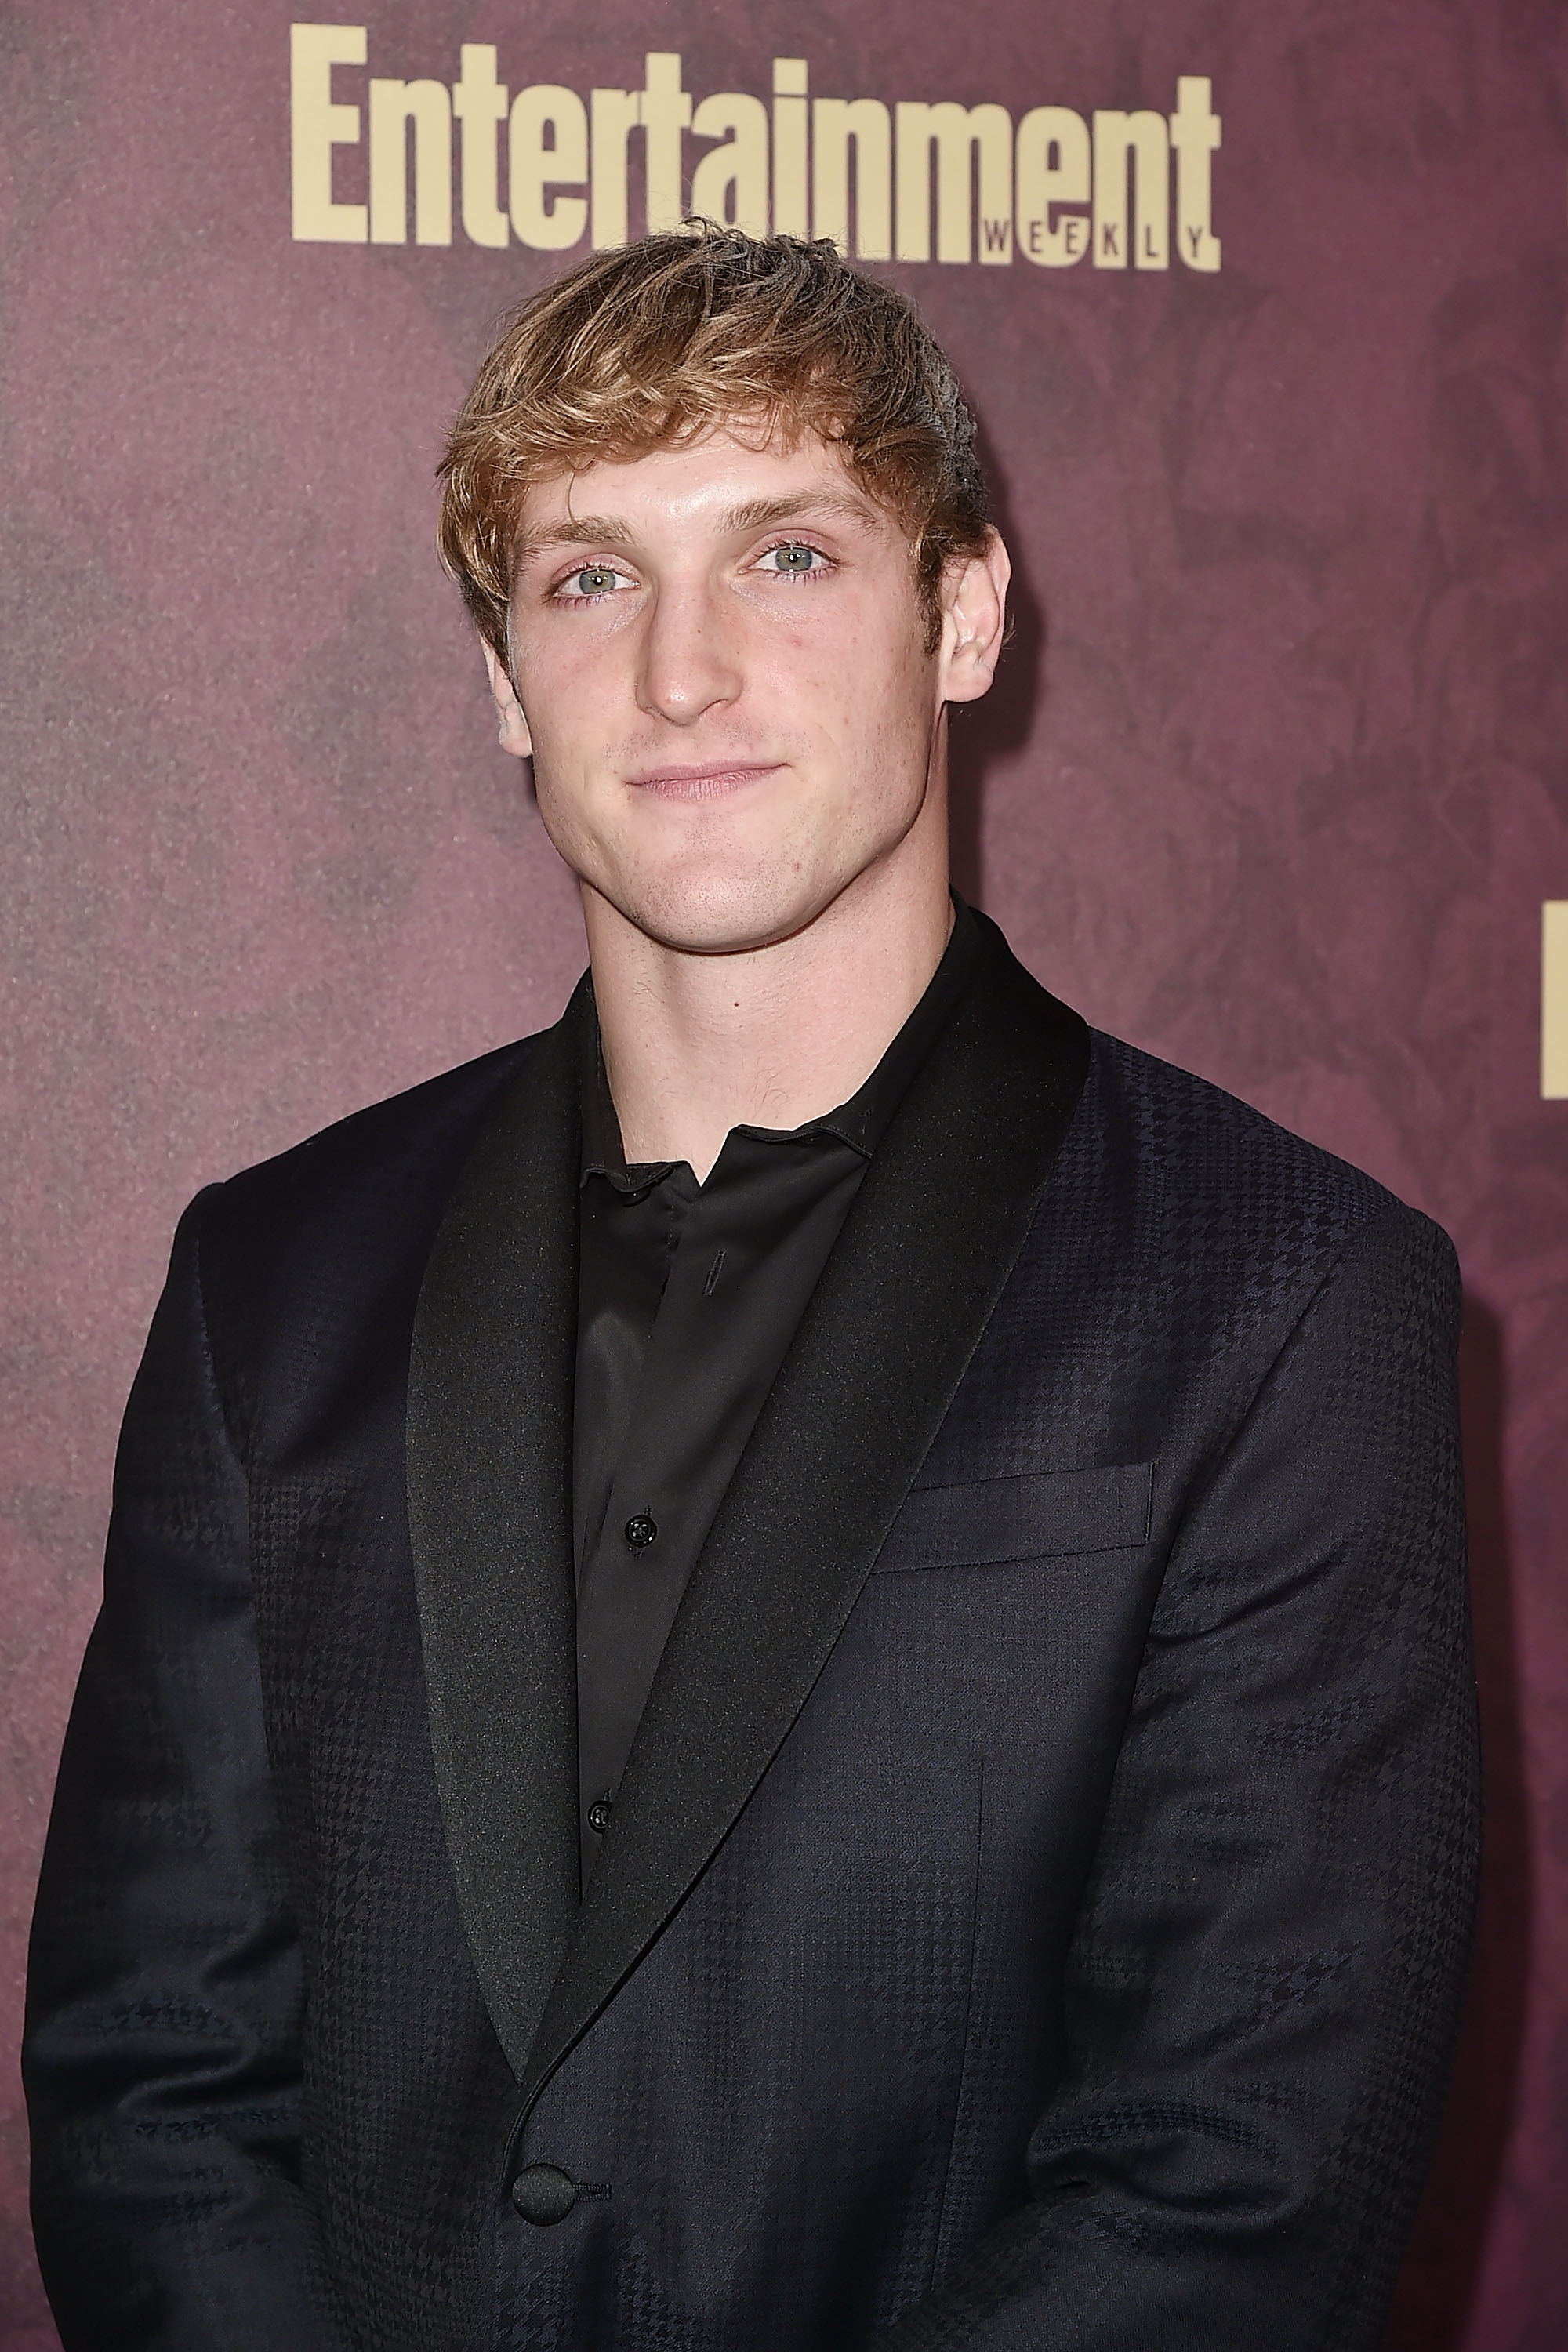 Logan Paul attends the Entertainment Weekly Pre-Emmy Party 2018 at Sunset Tower Hotel on September 15, 2018, in West Hollywood, California. | Source: Getty Images